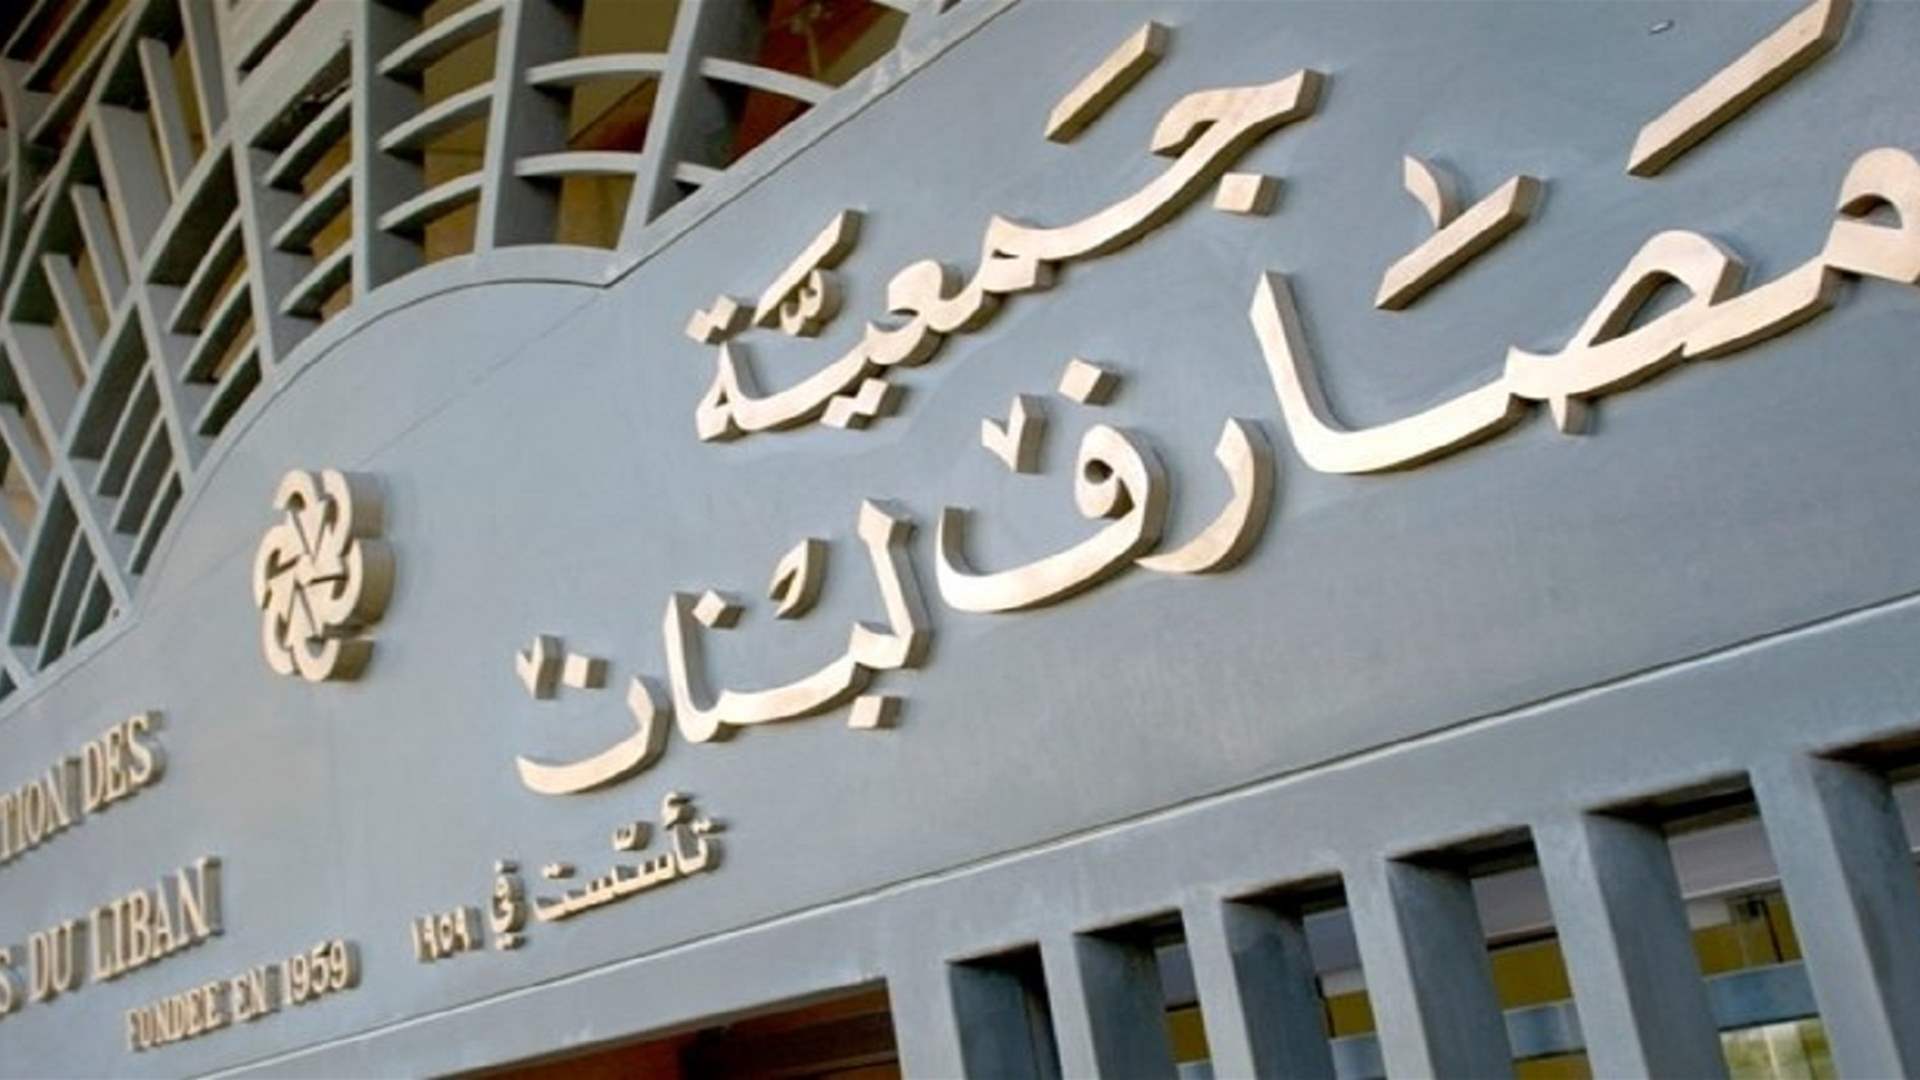 Banks suspend strike for one week: LBCI sources